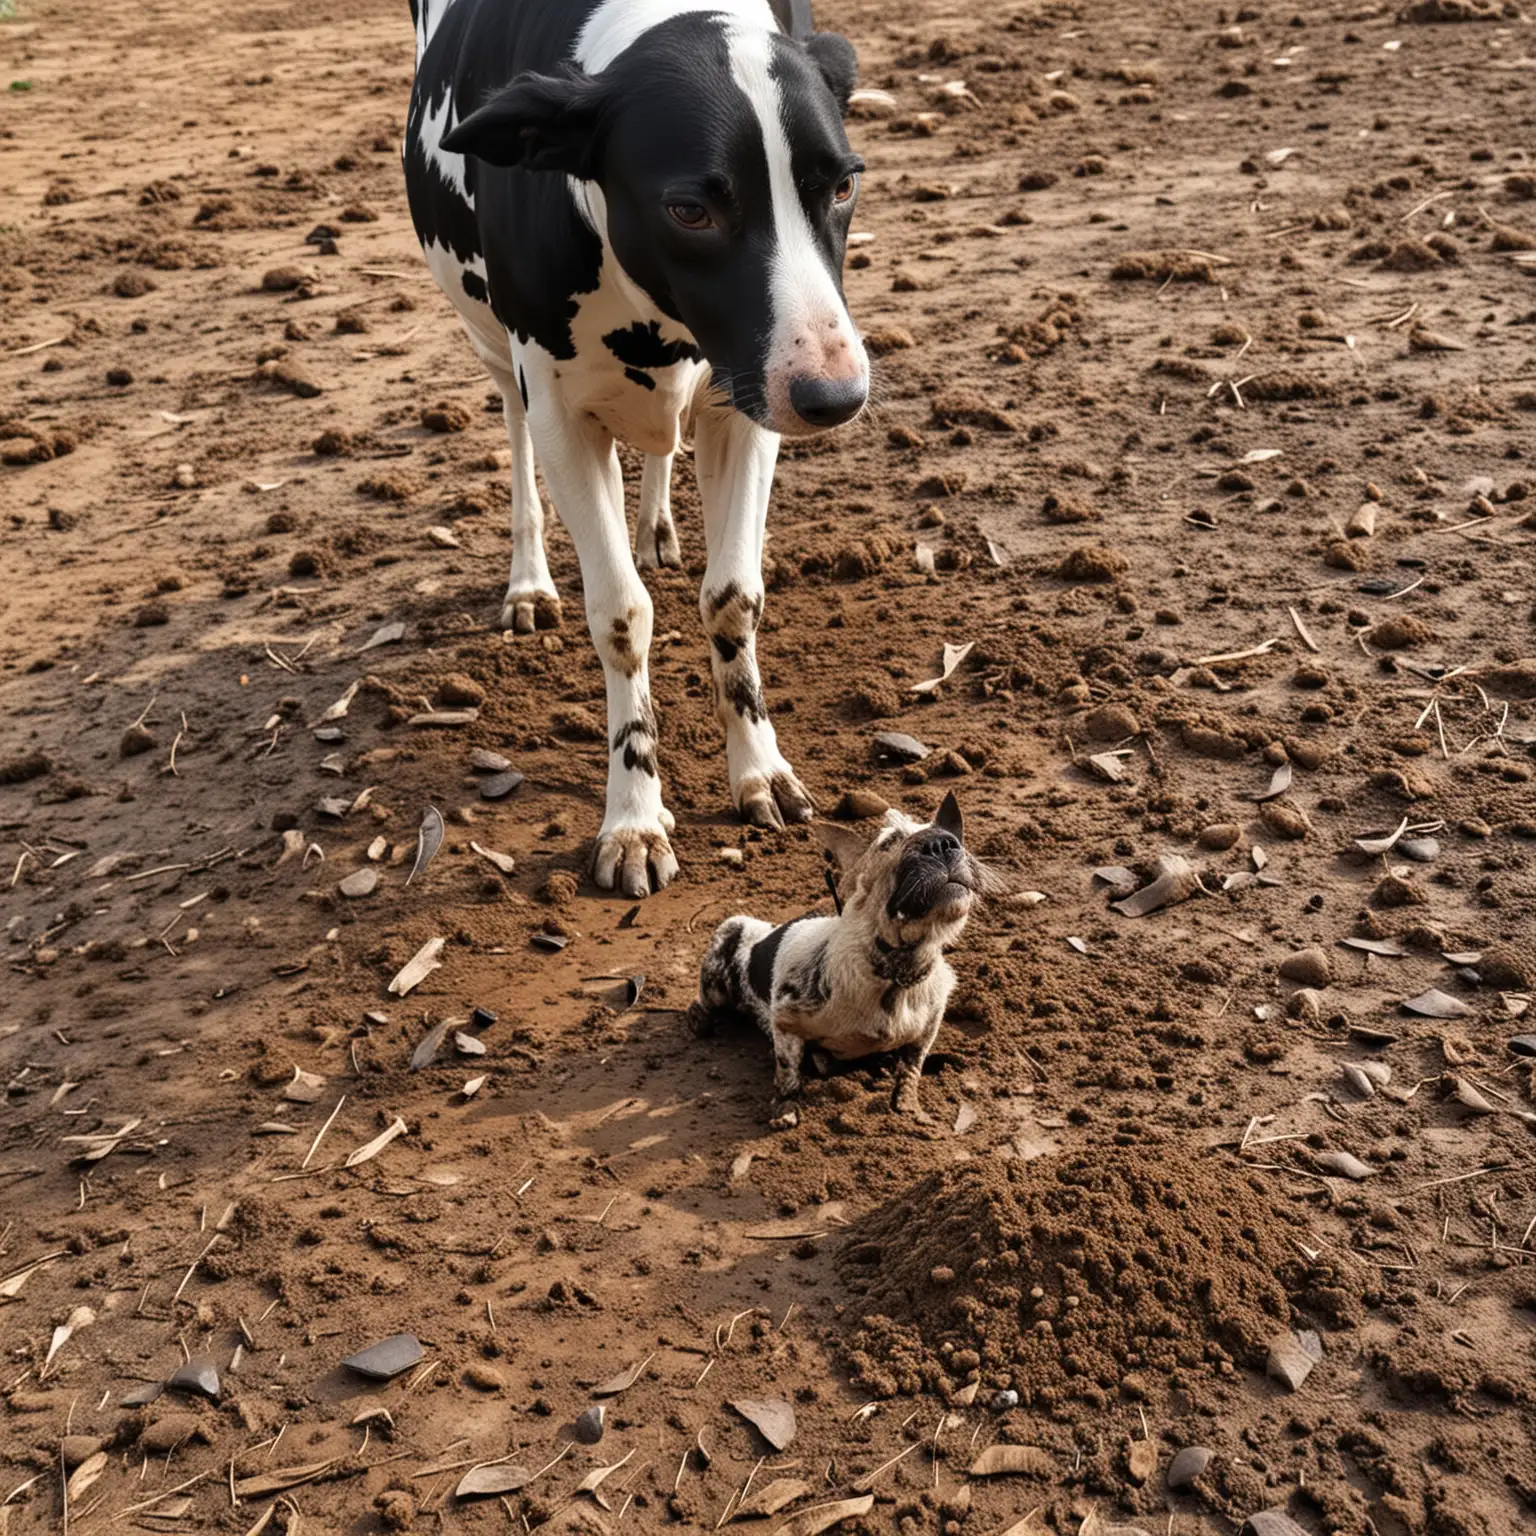 Bird Trapped in Cow Dung with Approaching Dog